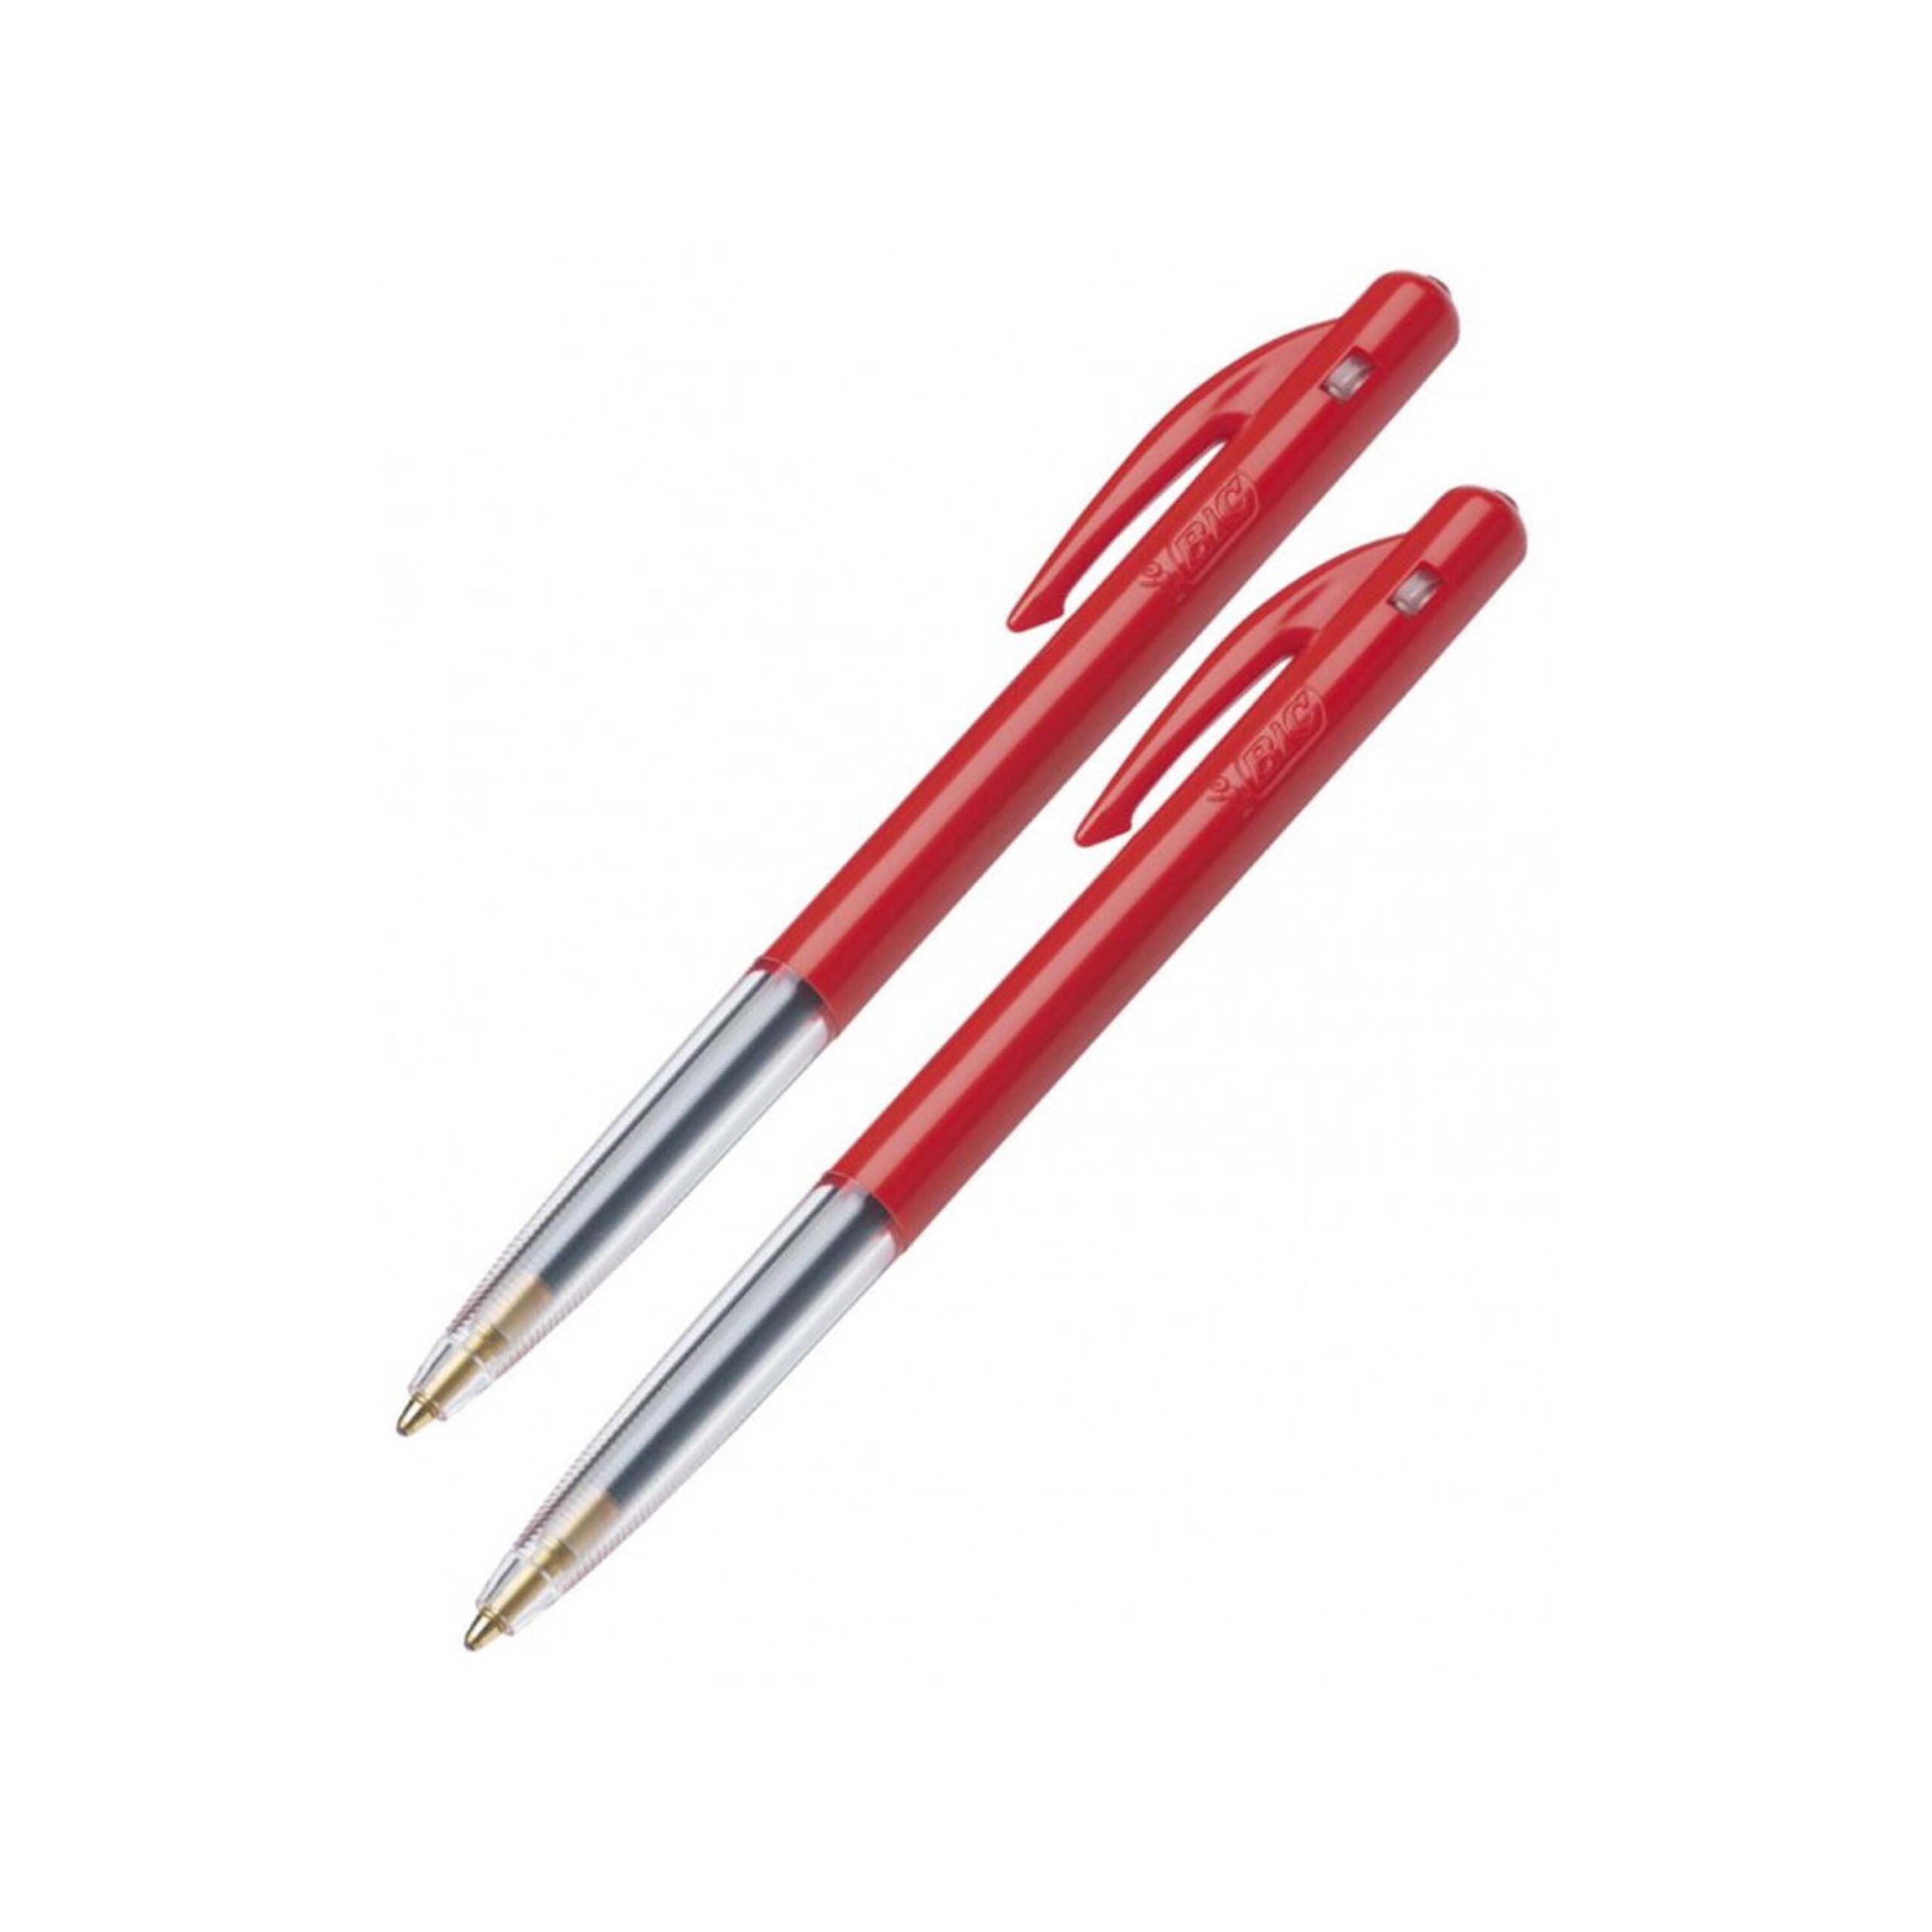 BIC CLIC PEN RED
2PC IN BLISTER
PACK